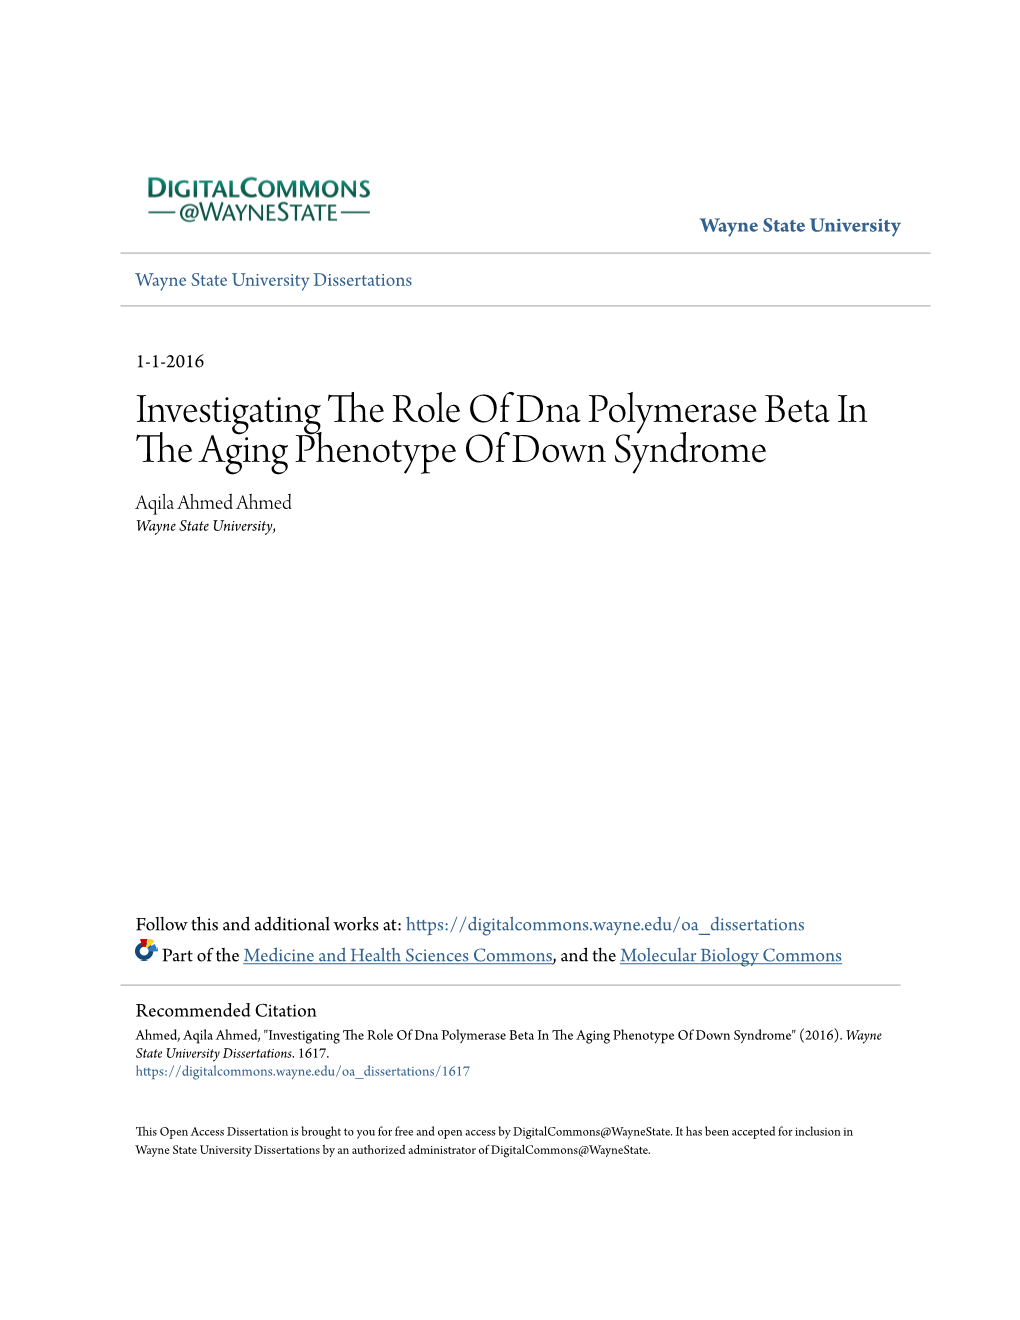 Investigating the Role of Dna Polymerase Beta in the Aging Phenotype of Down Syndrome Aqila Ahmed Ahmed Wayne State University